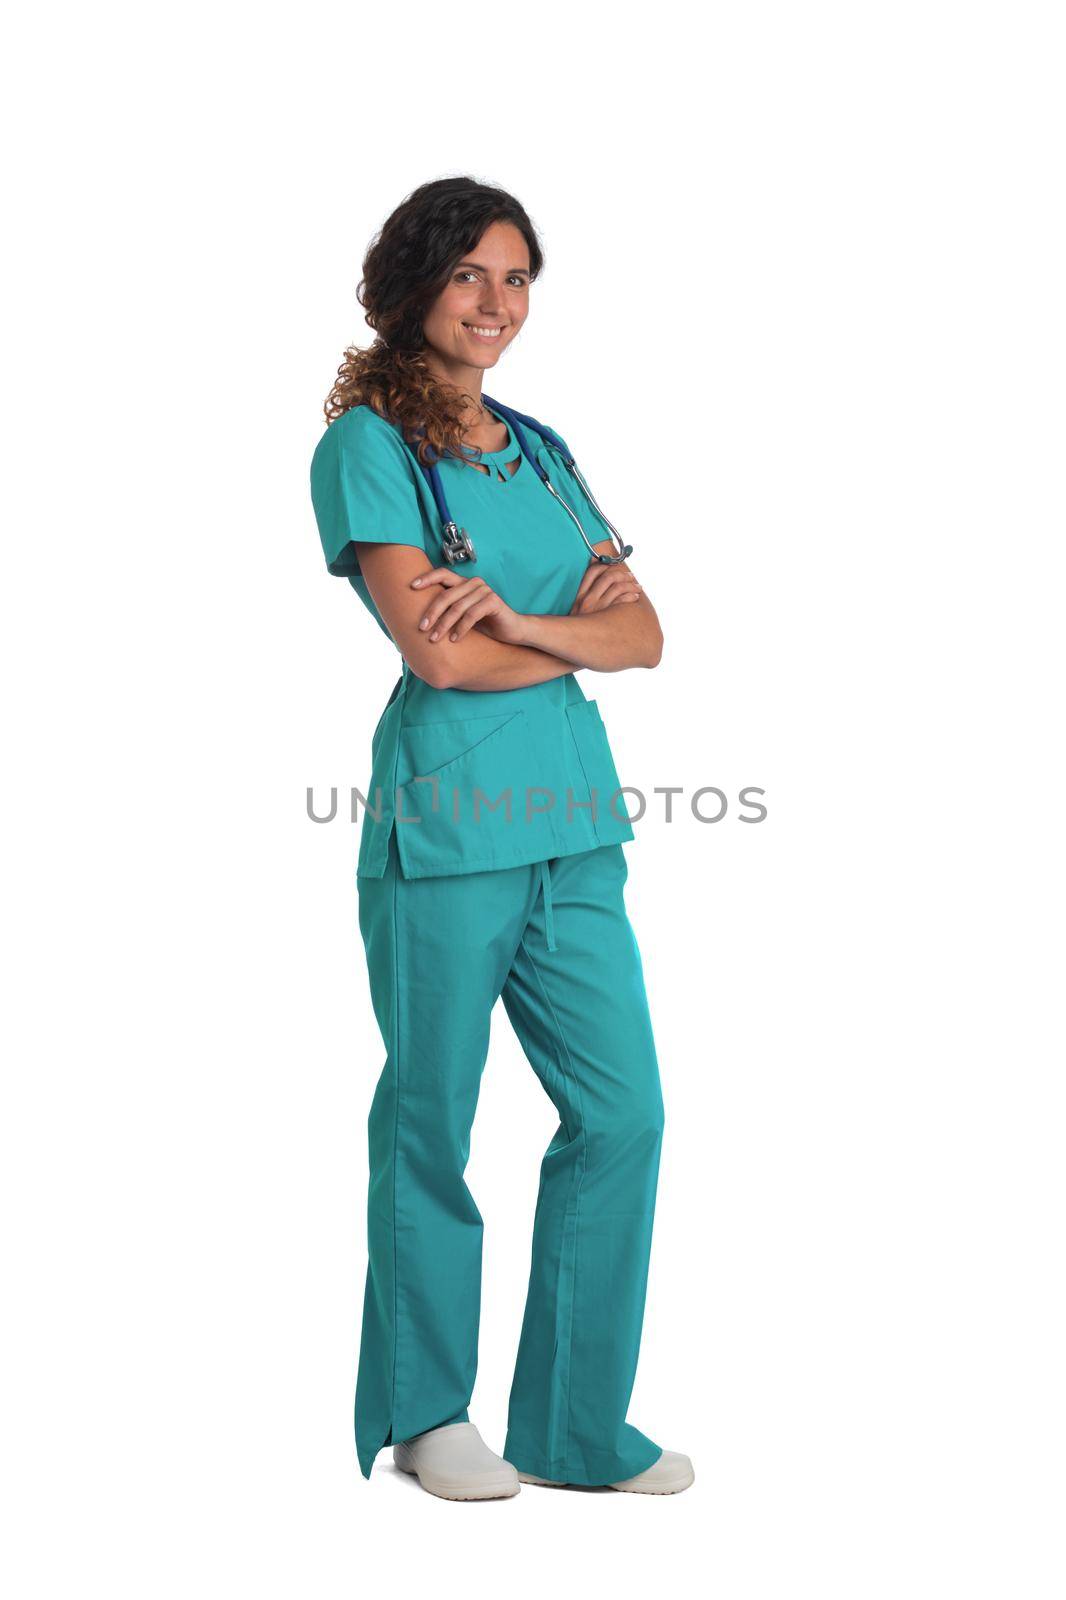 Nurse doctor woman smile with stethoscope stand with arms folded, wear blue surgery medical suit. Isolated on white background